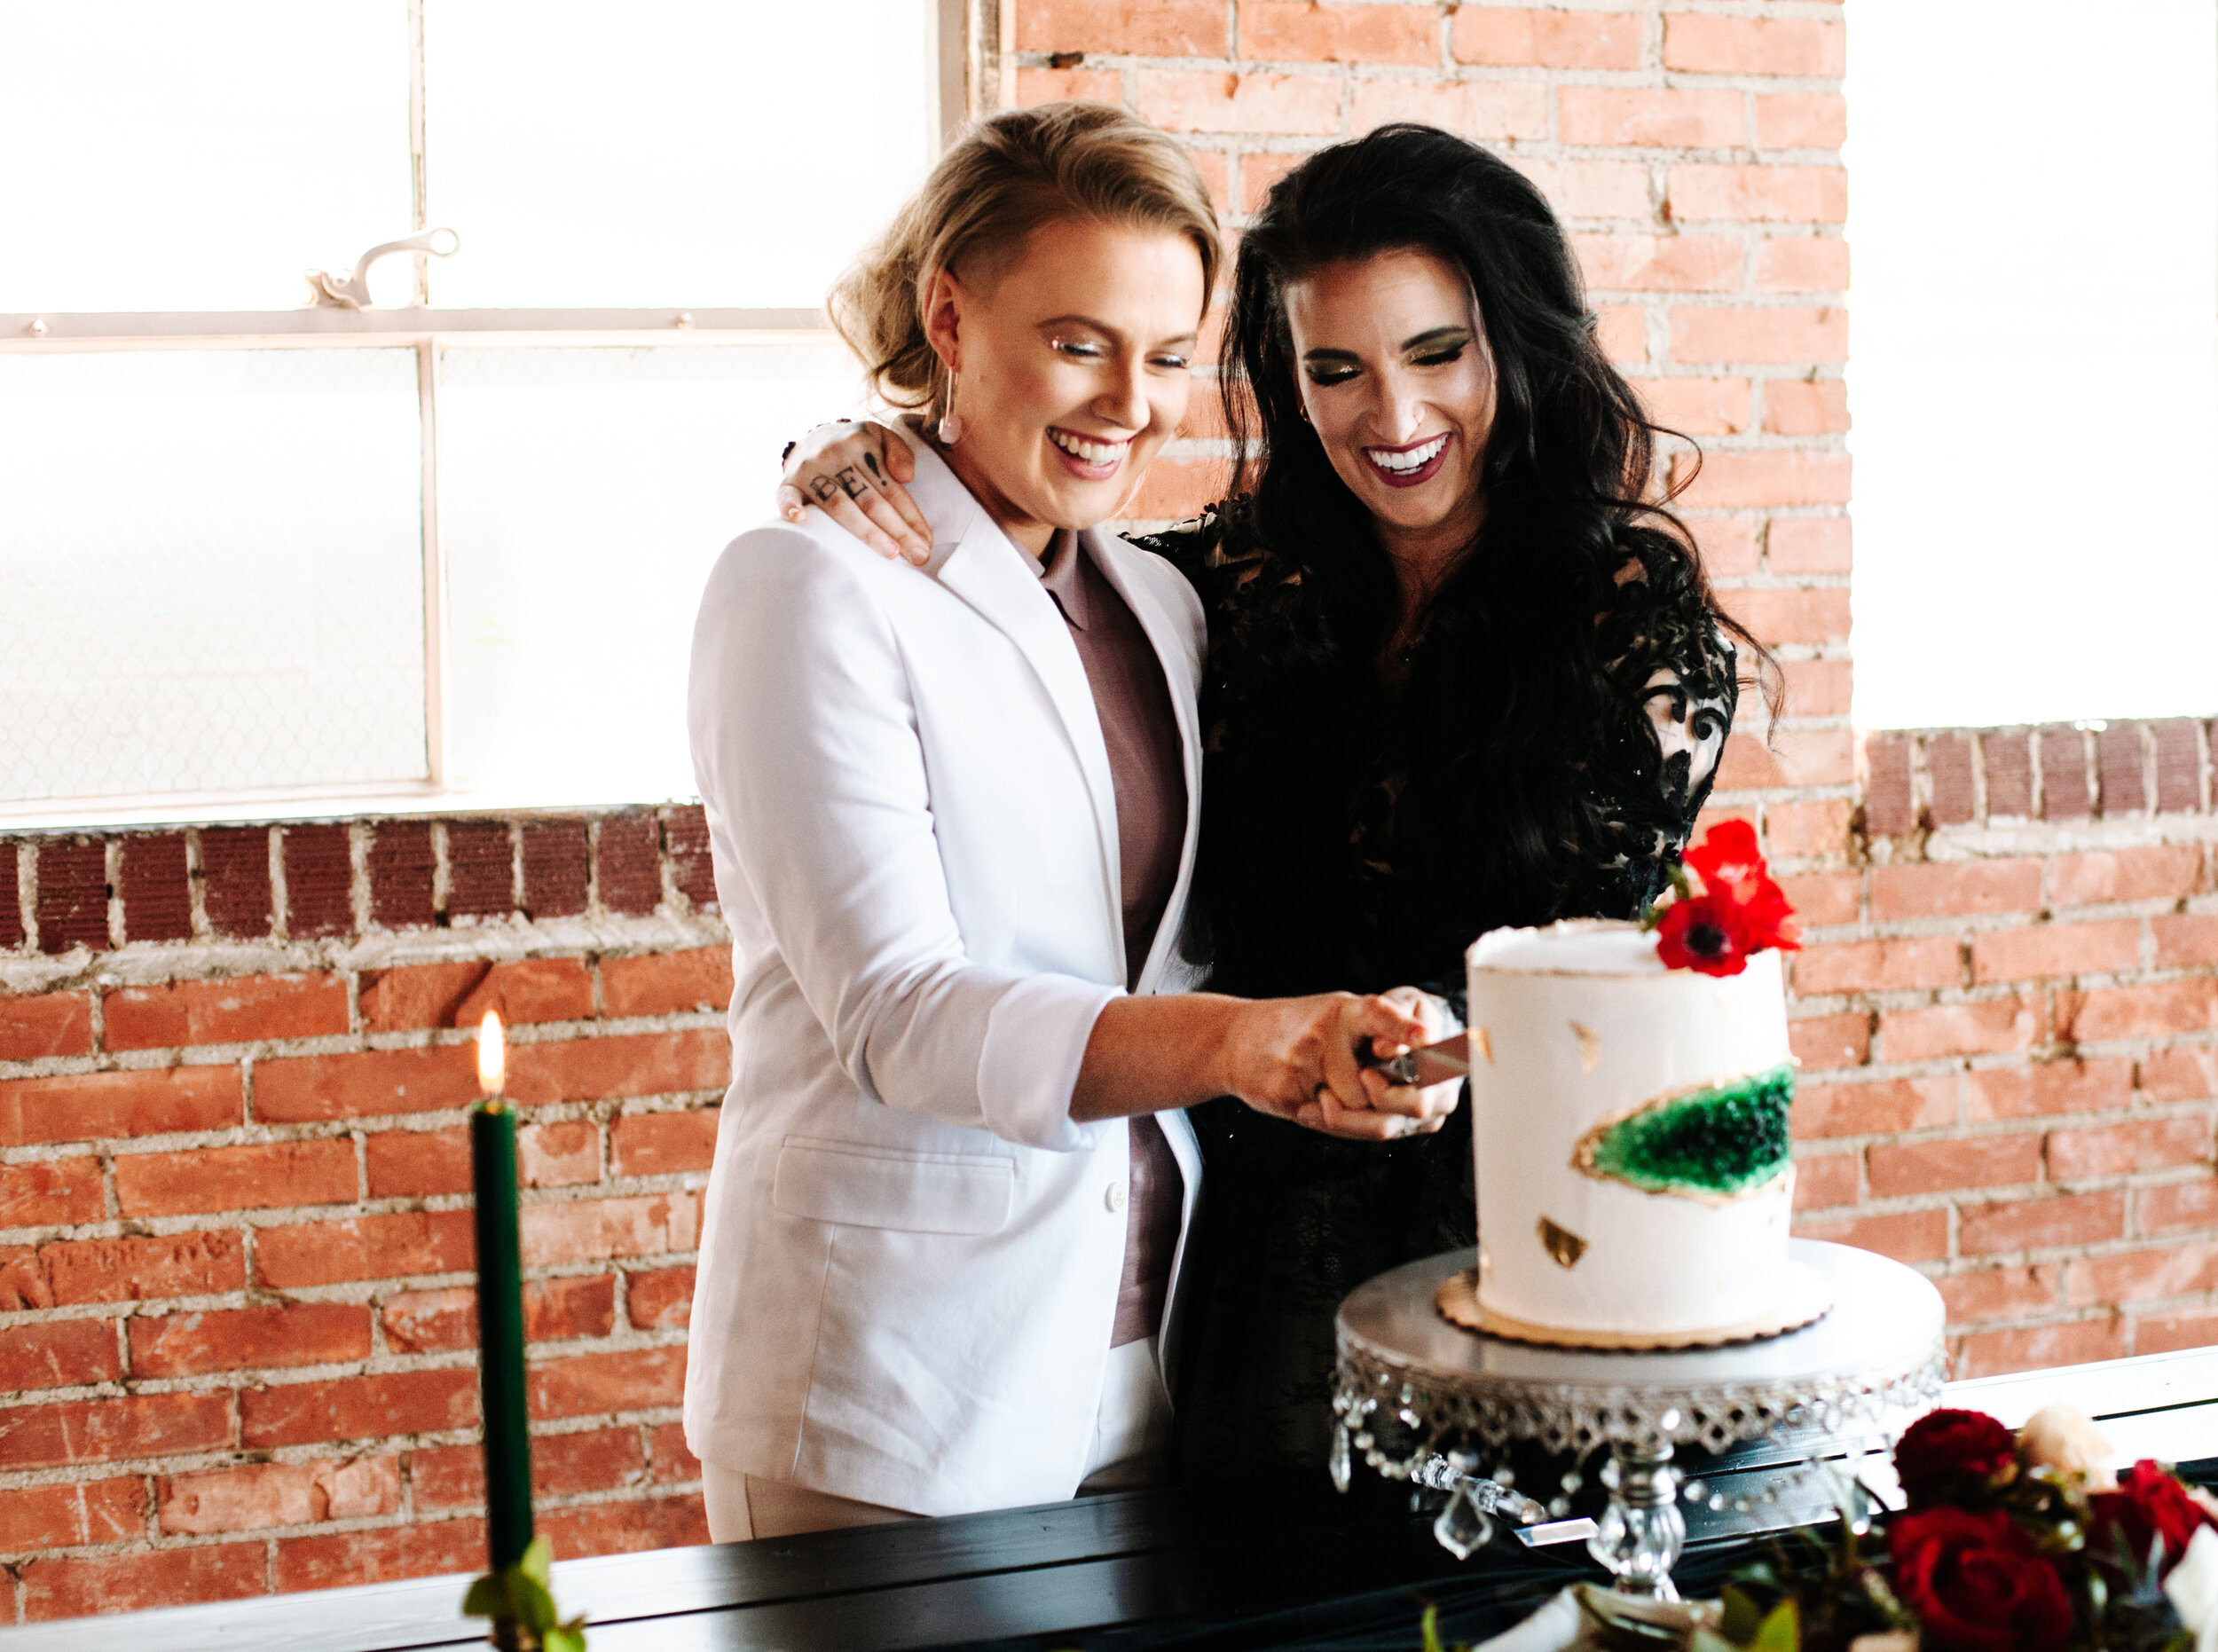 Lesbian couple cutting their wedding cake provided by Something Frosted bakery in Utah. 